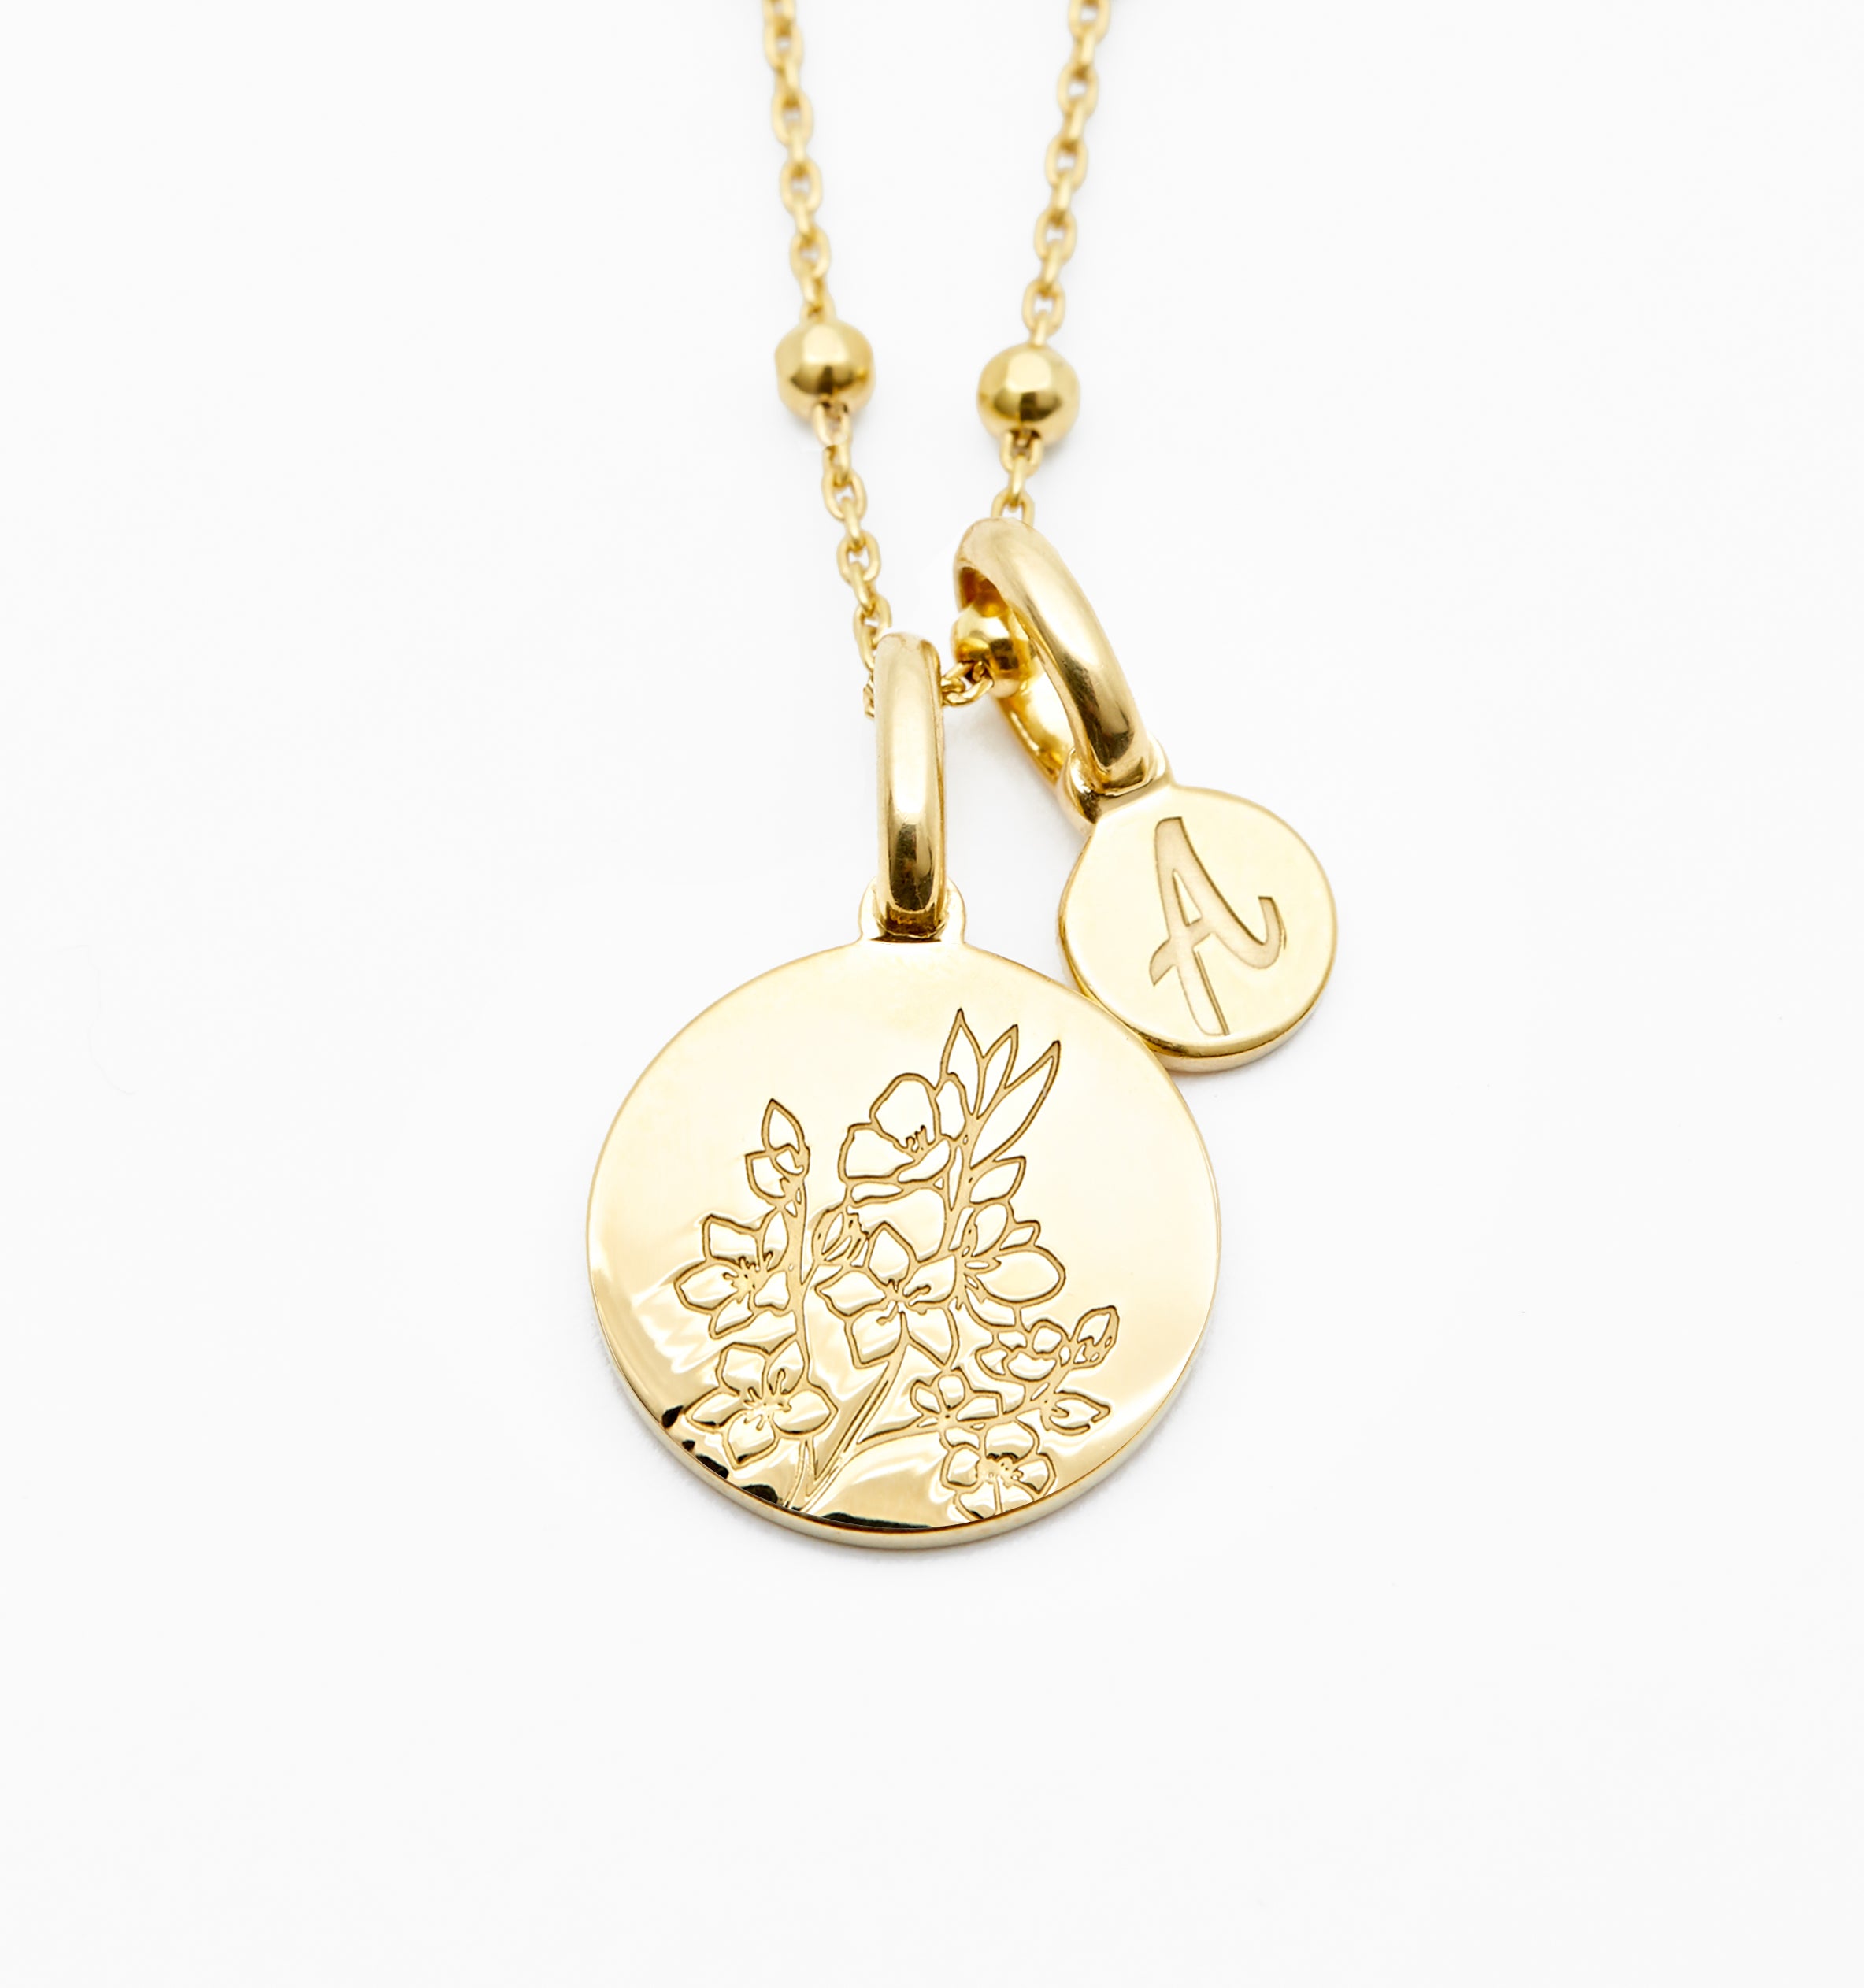 Cherry Blossom Initial Necklace - March Flower